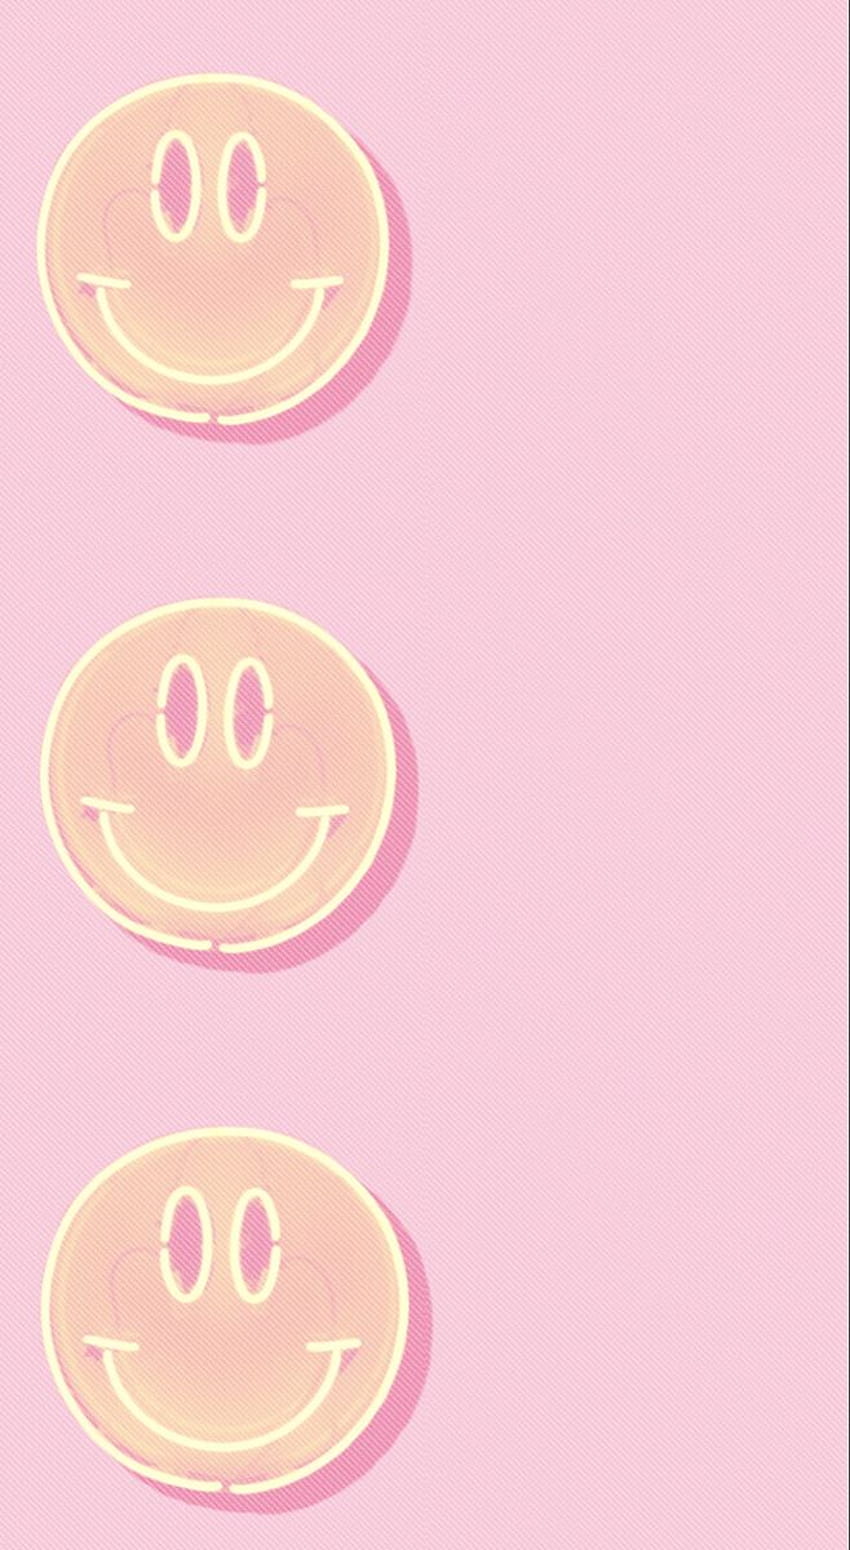 Replying to Spam123 Smile backgrounds So cute especially for summ   TikTok